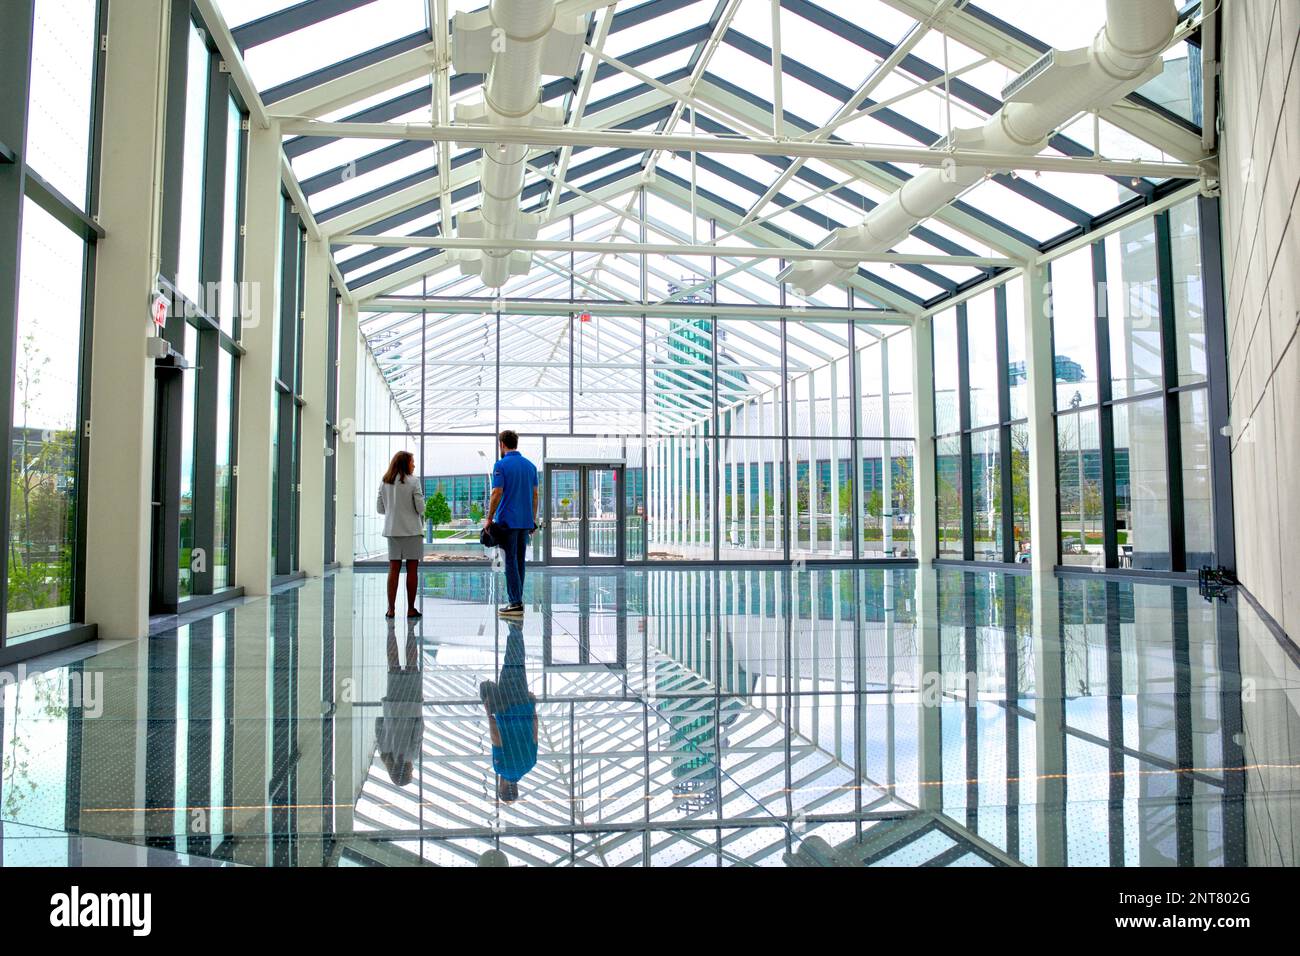 Reflection of the glass dome with the rear view of a couple Stock Photo